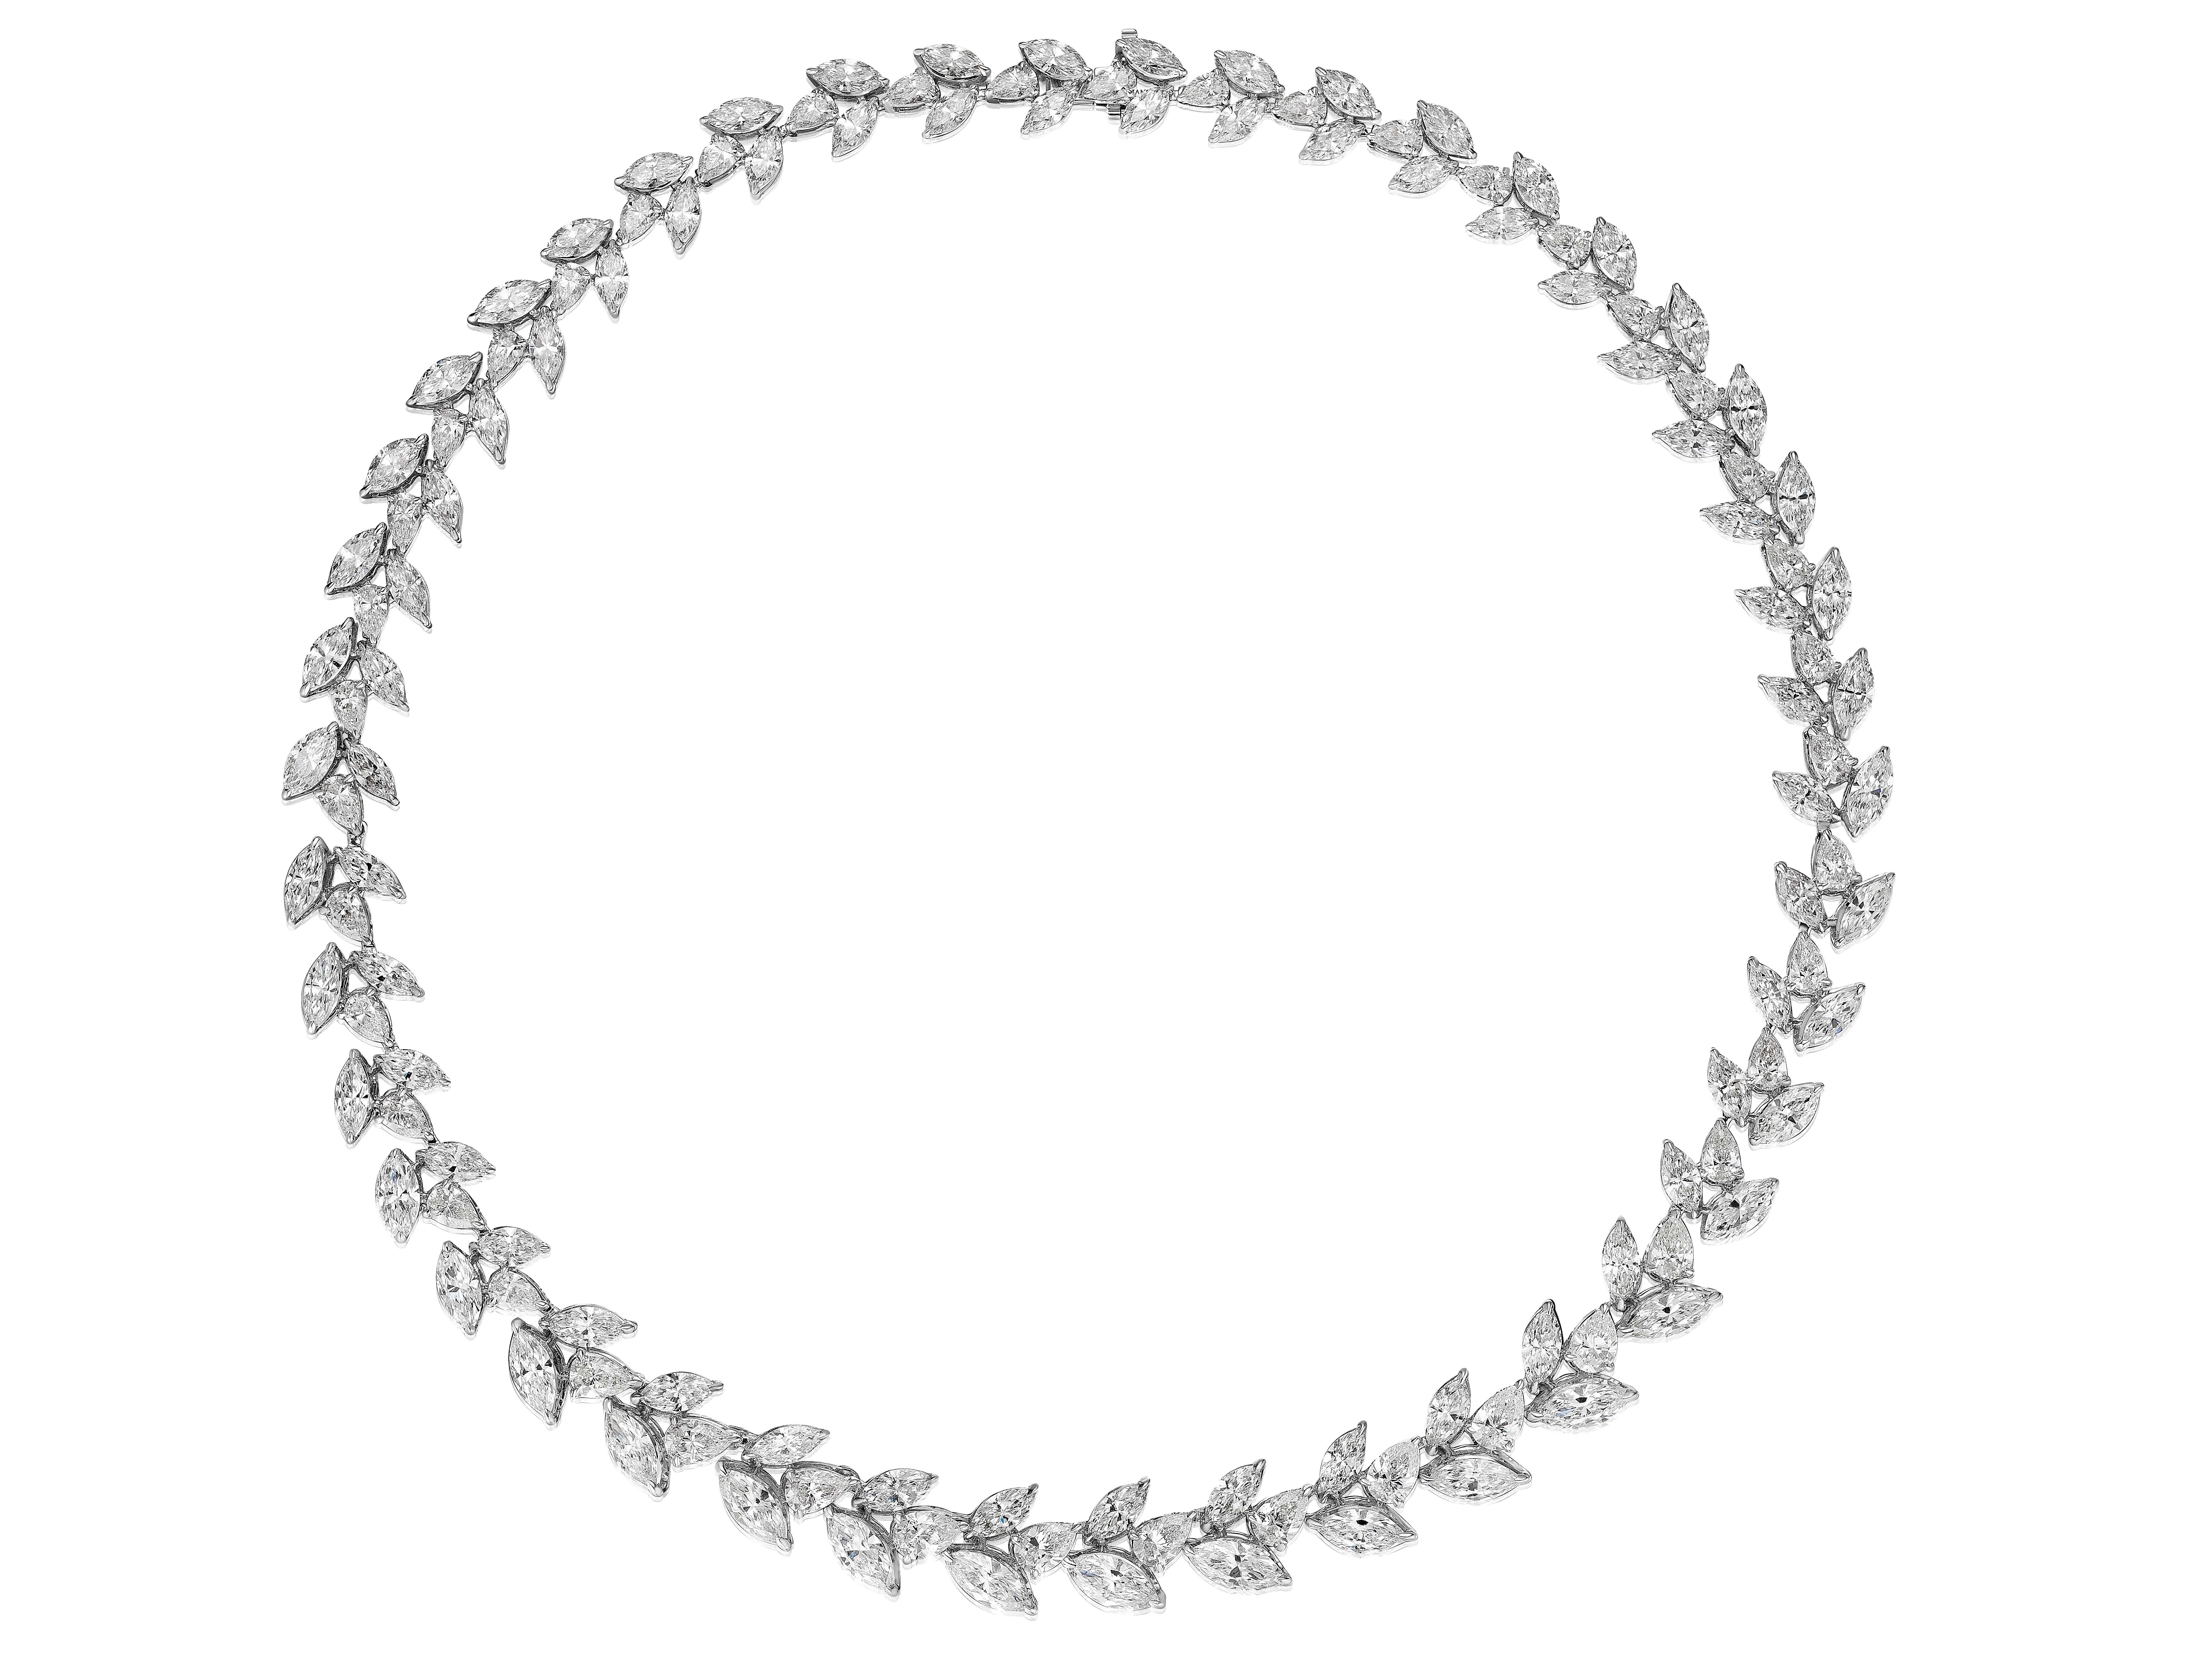 Gorgeous necklace comprised of 132 Marquise and Pear shaped diamonds weighing a total of 41.25 Carats.
88 Marquise shaped Diamonds weighing 27.57 Carats.
44 Pear shaped Diamonds weighing 13.68 Carats.
Measures 17 inches.
Set in 18 Karat White Gold.